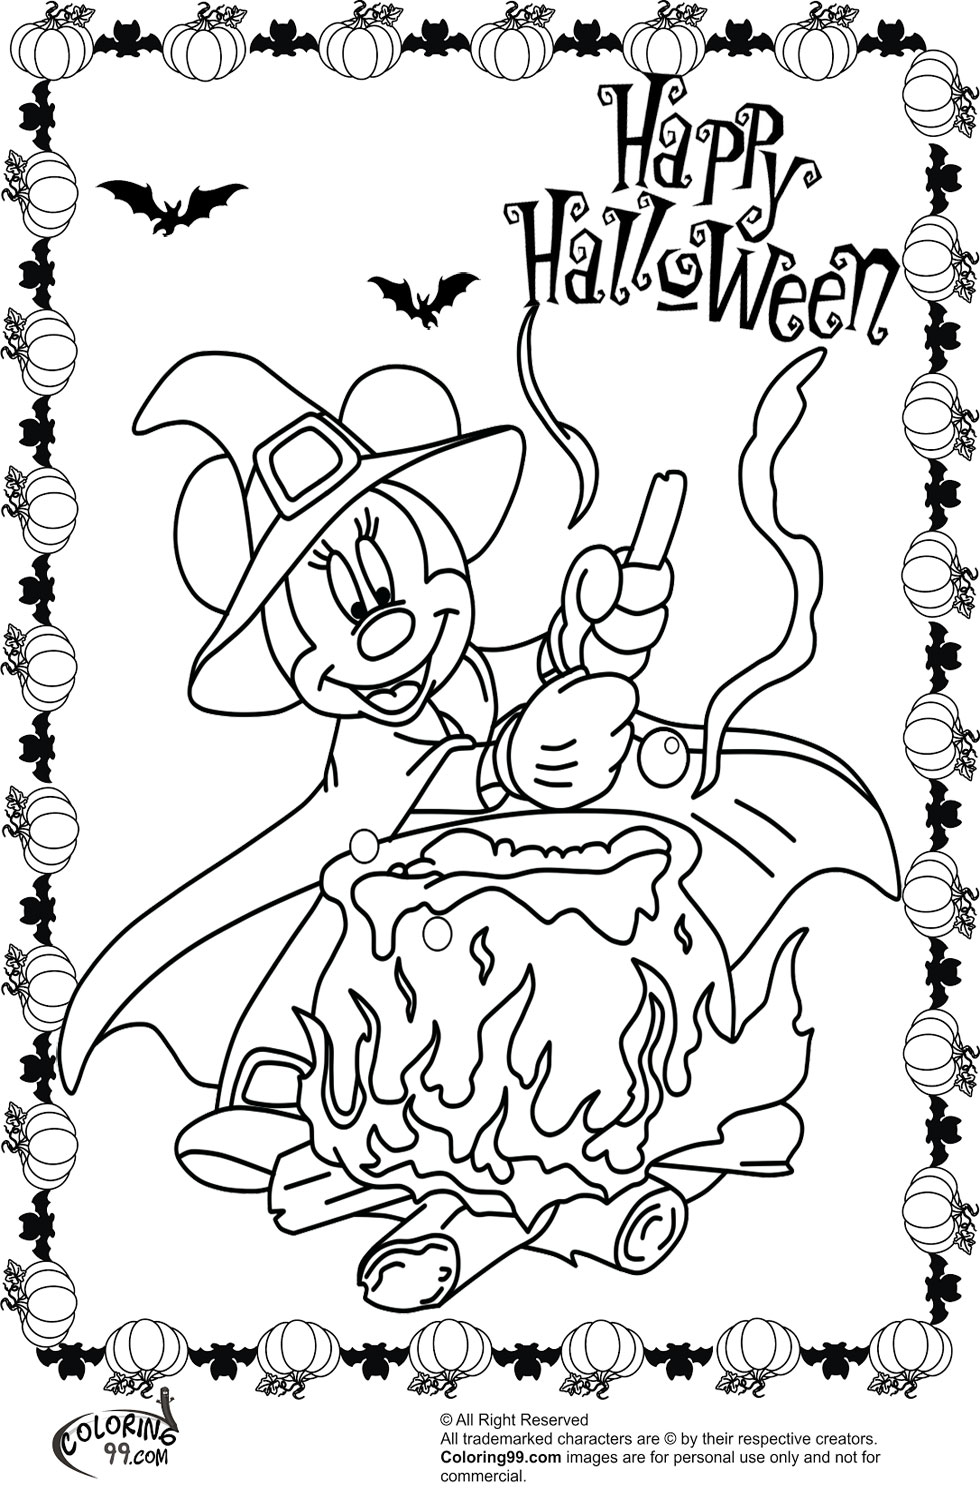 Minnie and Mickey Mouse Coloring Pages for Halloween | Team colors